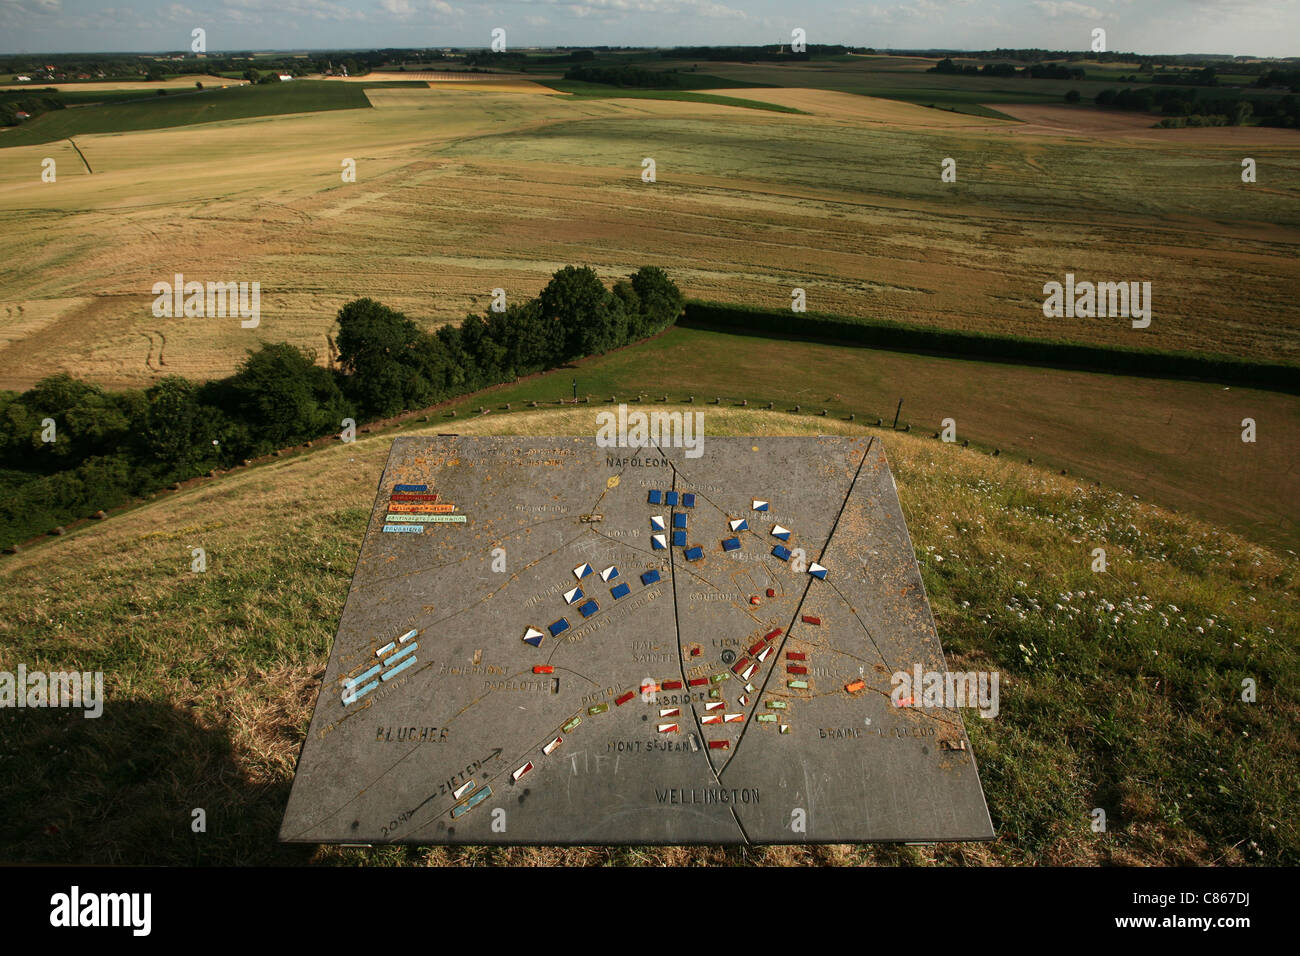 Battlefield of the Battle of Waterloo near Brussels, Belgium, with the map of the battle on the top of the Lion’s mound. Stock Photo